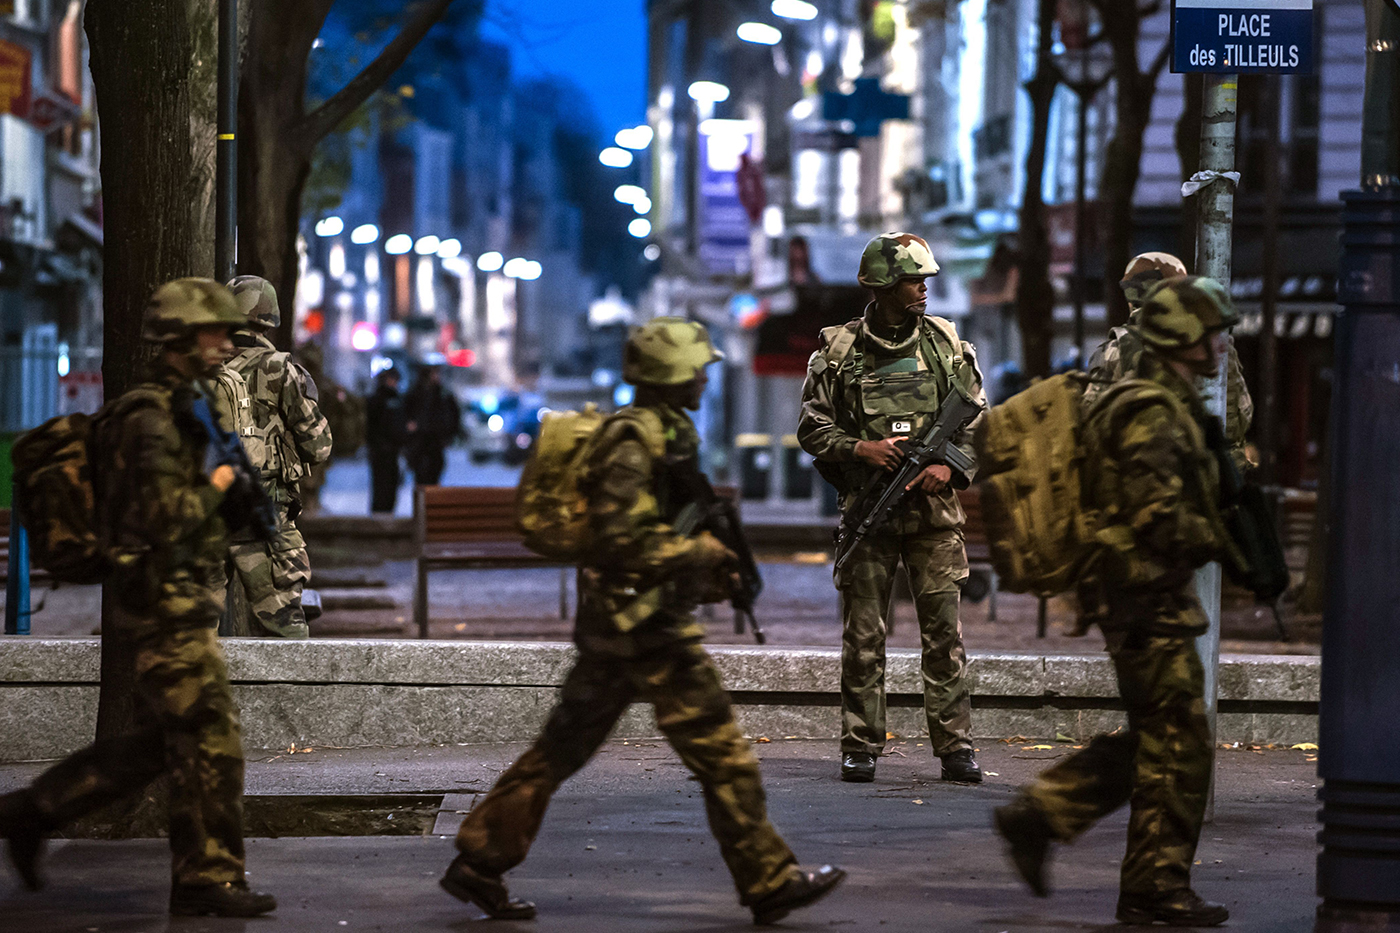 Special Police, Army, and other units move toward the scene in Paris suburb Saint-Denis on Wednesday, Nov. 18, 2015. Heavily armed police surrounded a suburban Paris apartment in a raid targeting the suspected mastermind of the Paris attacks. Credit: KAMIL ZIHNIOGLOU/Sipa via AP Images